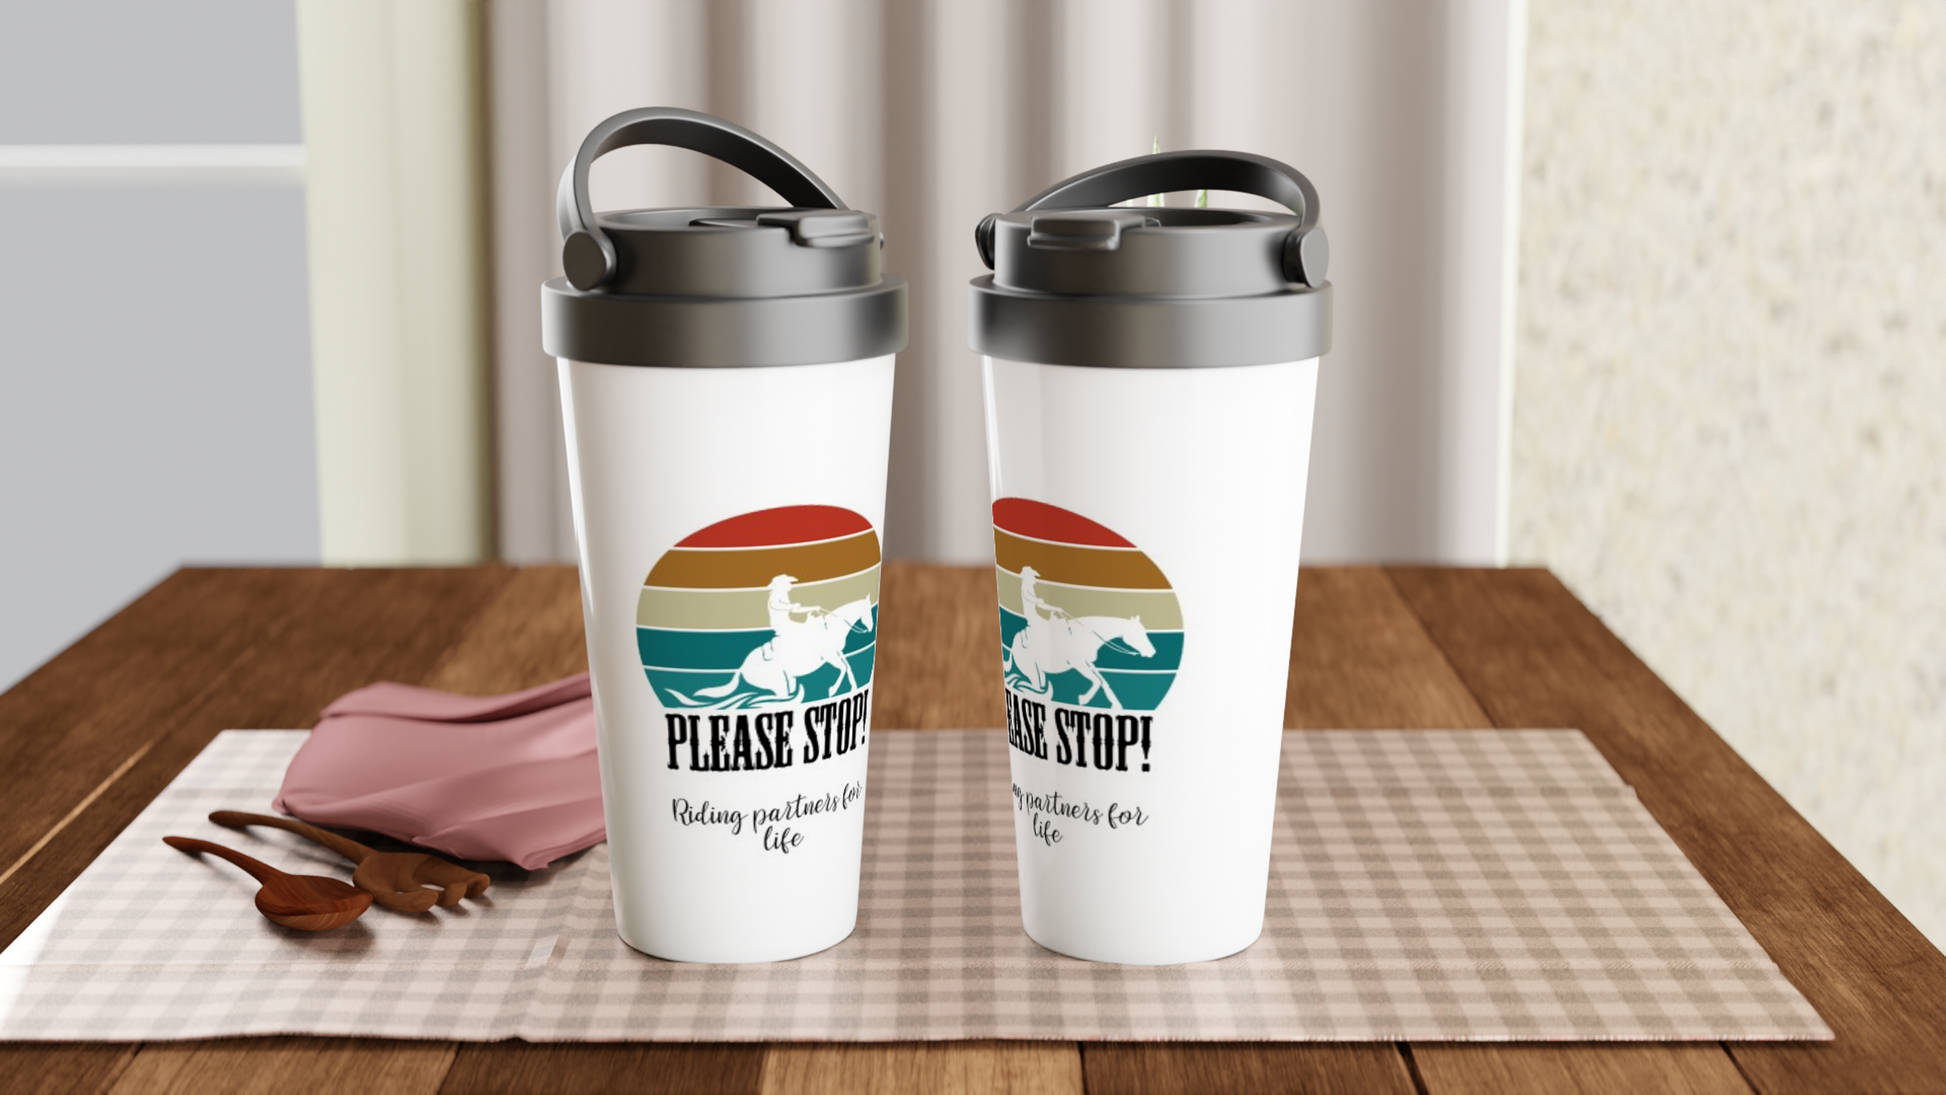 Hand Drawn Horse || 15oz Stainless Steel Travel Mug - Design: "Stop"; Static Design; Personalizable Text